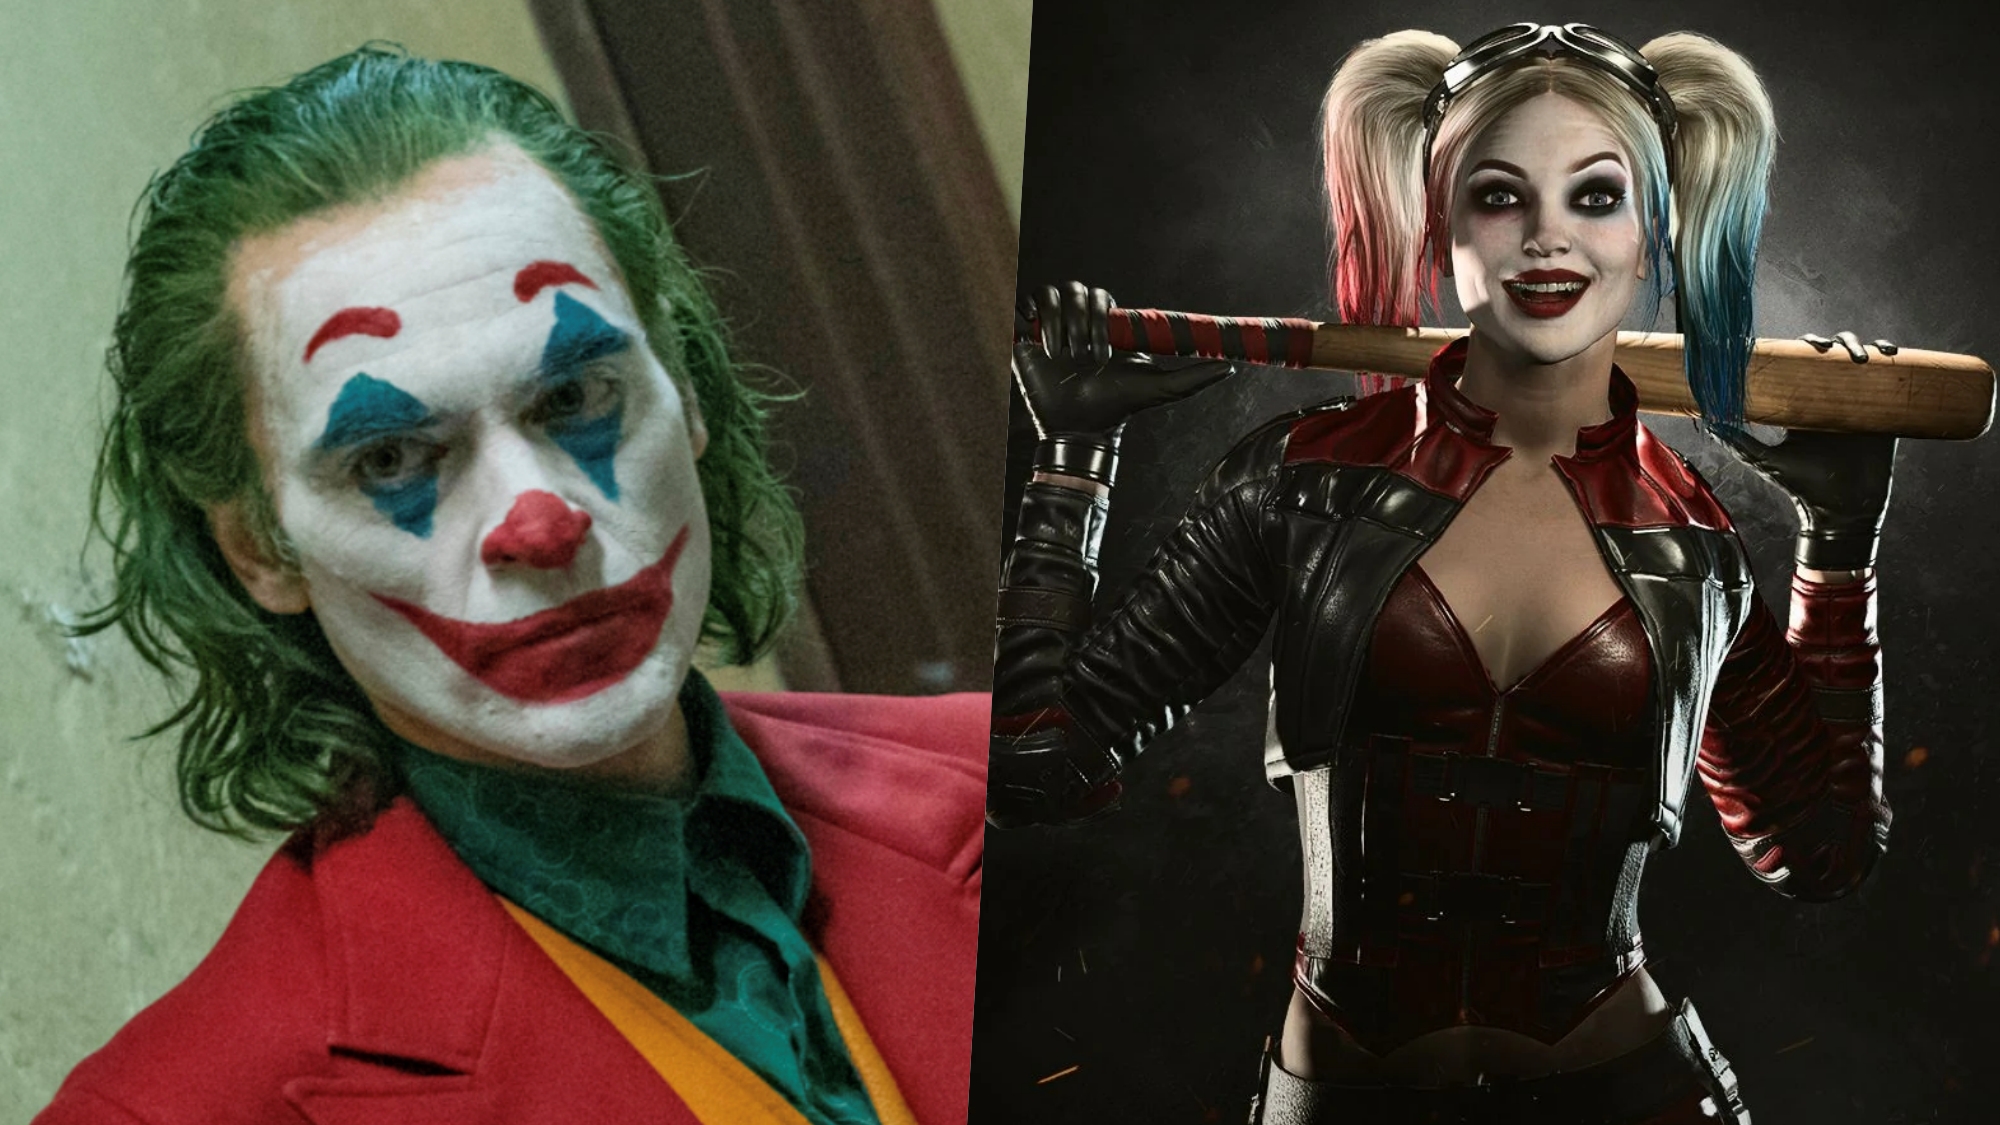 adine ferreira recommends Pictures Of Harley Quinn And Joker